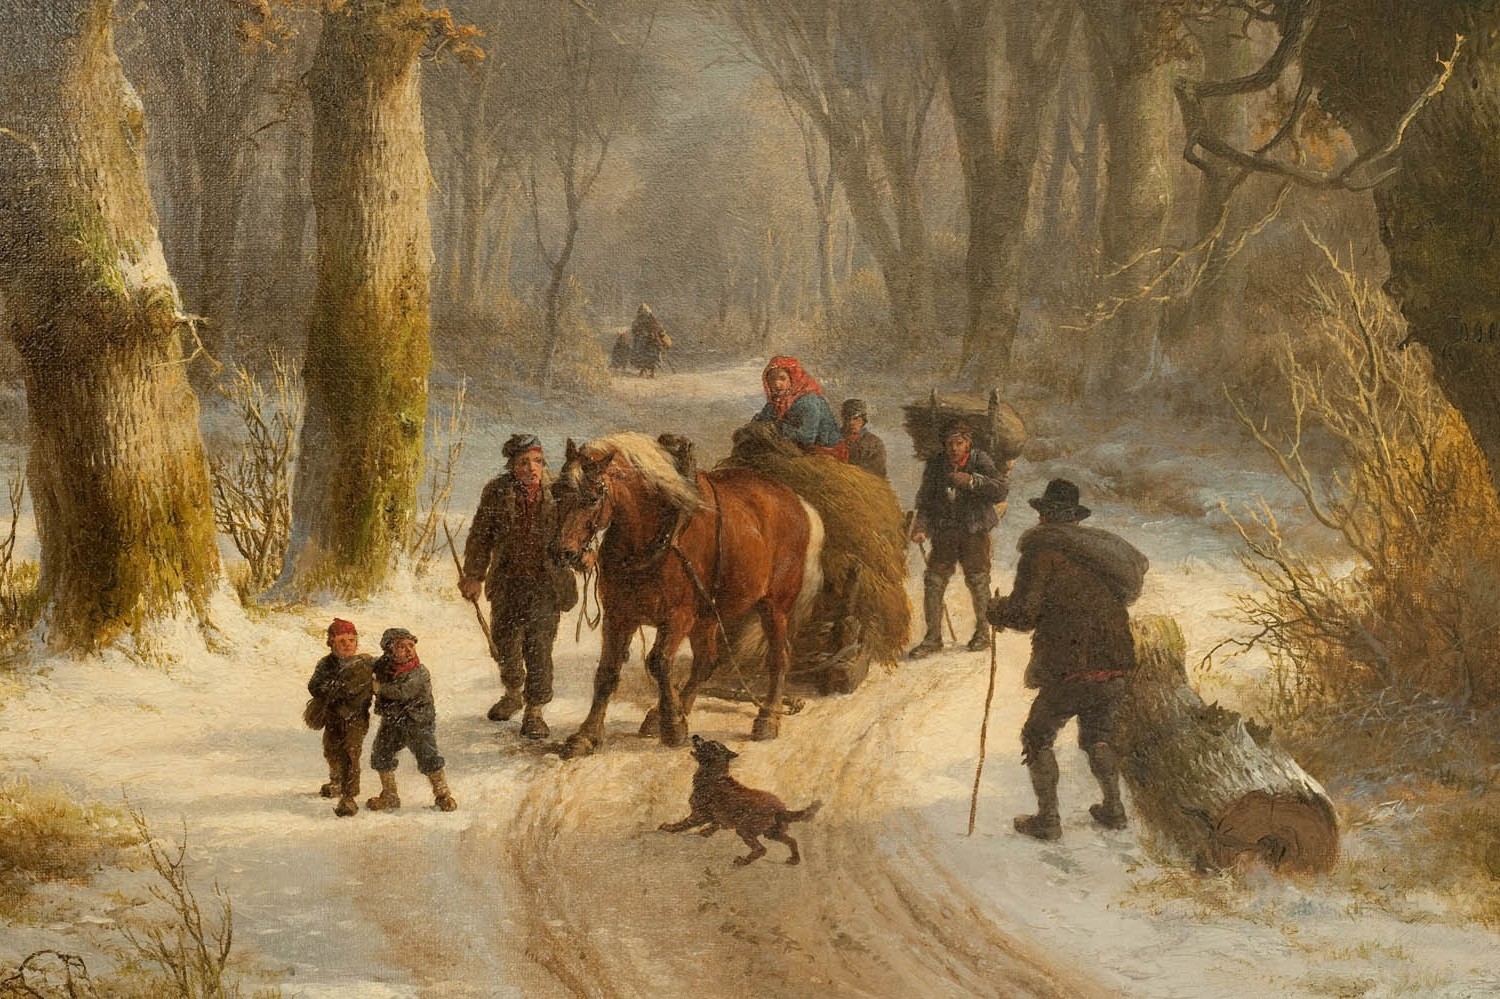 painting classic art peasants children dirt road horse log dog trees forest snow Wallpaper